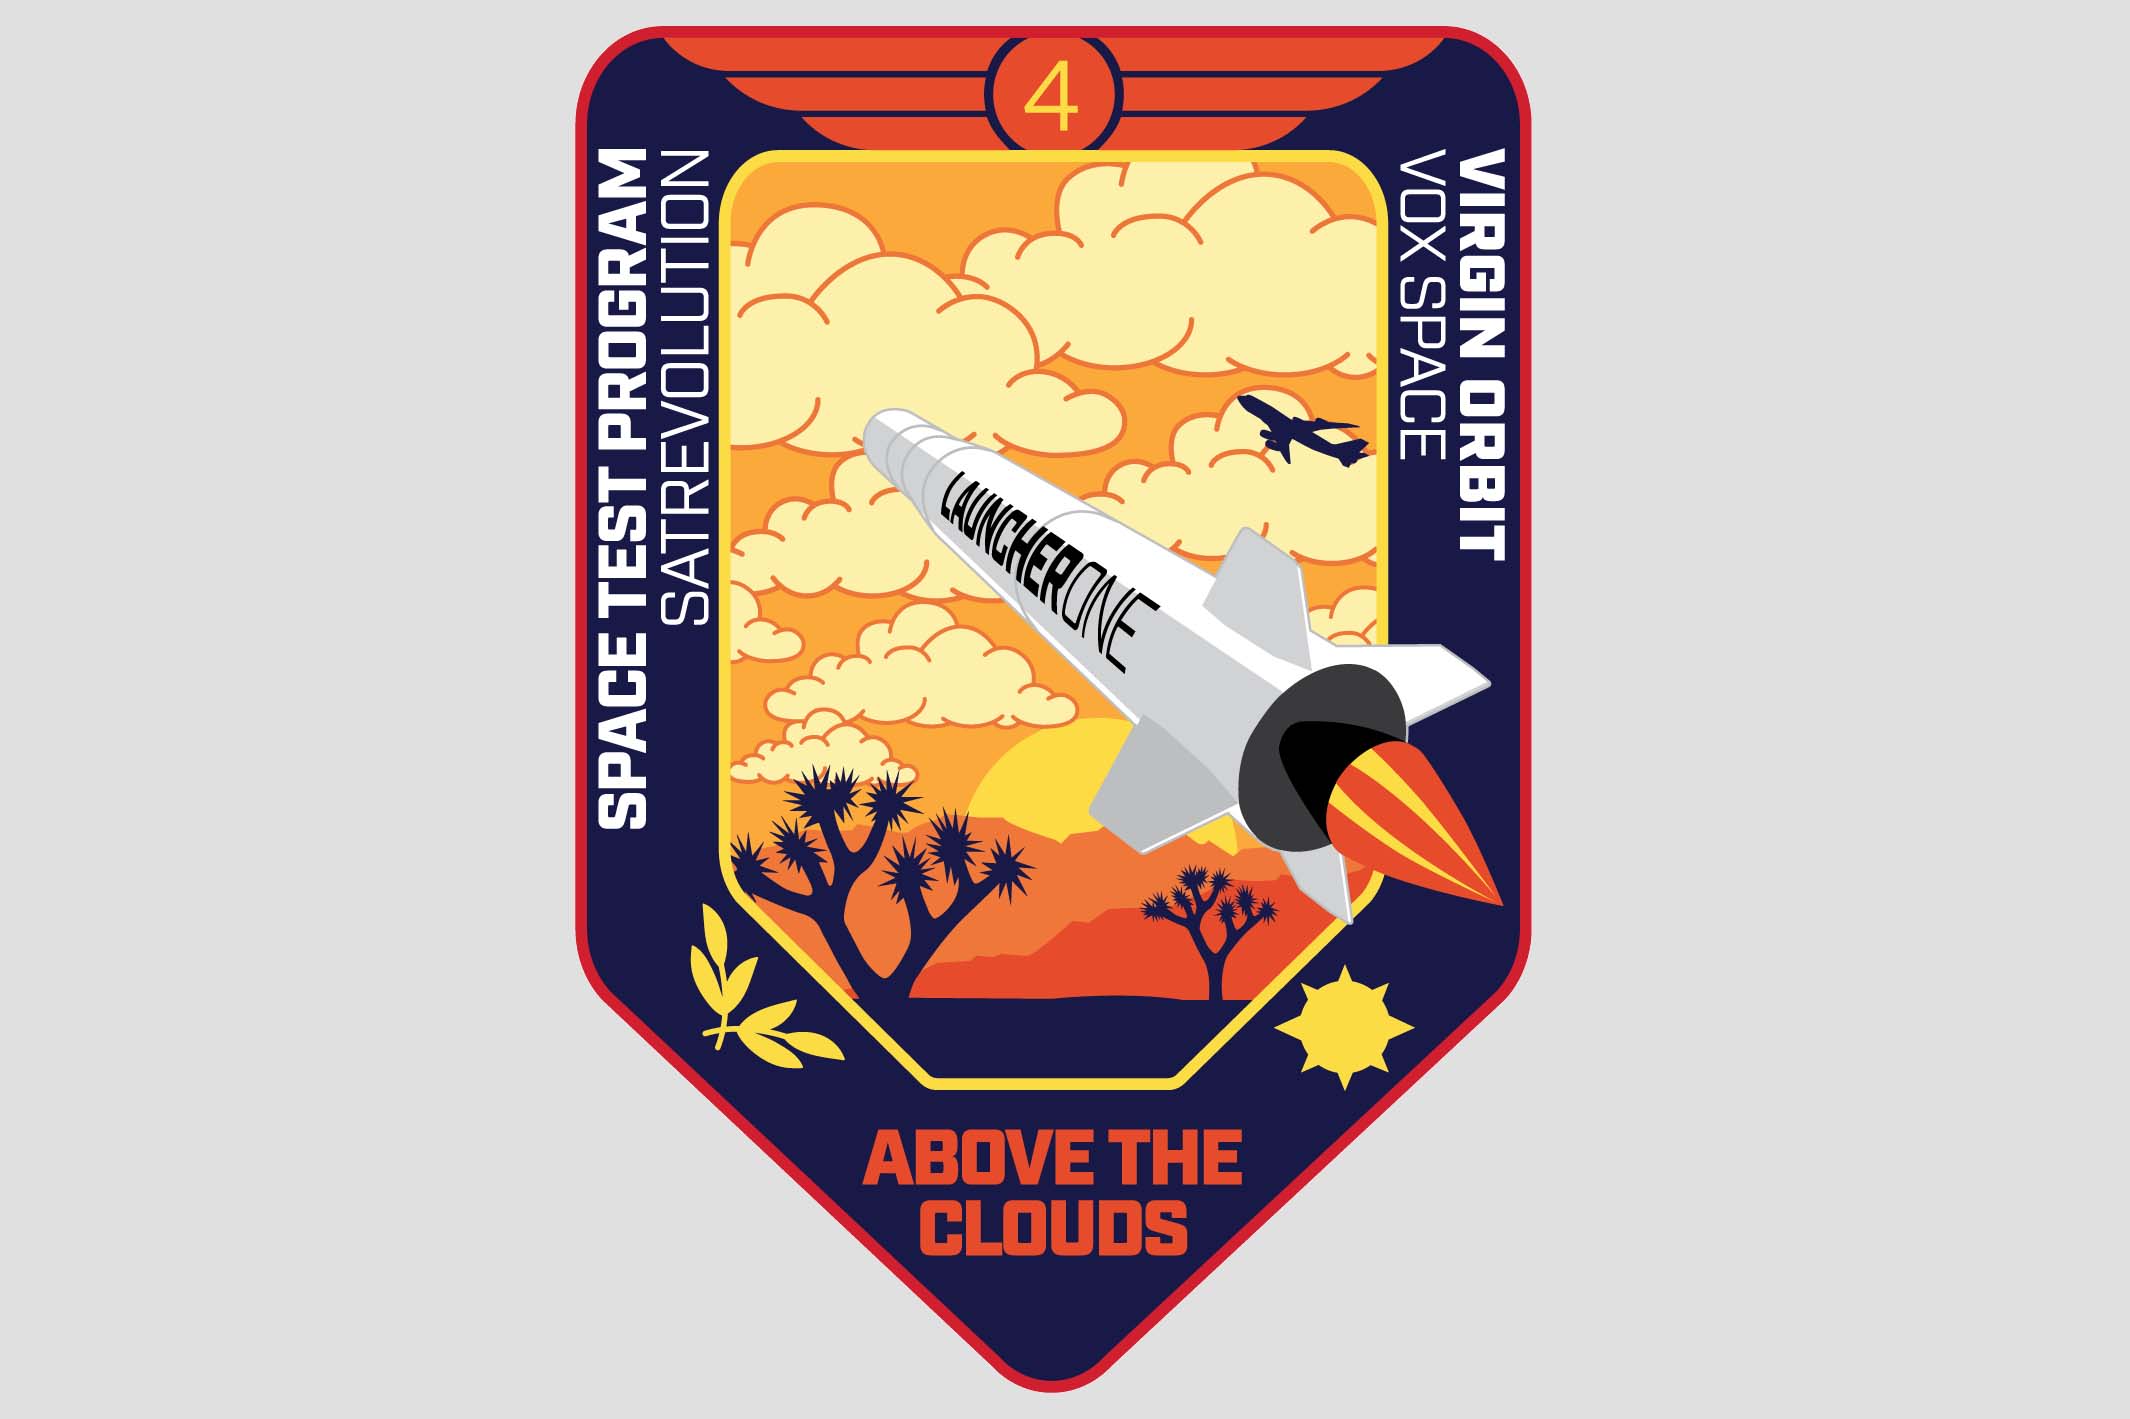 Virgin Orbit Above the Clouds mission patch